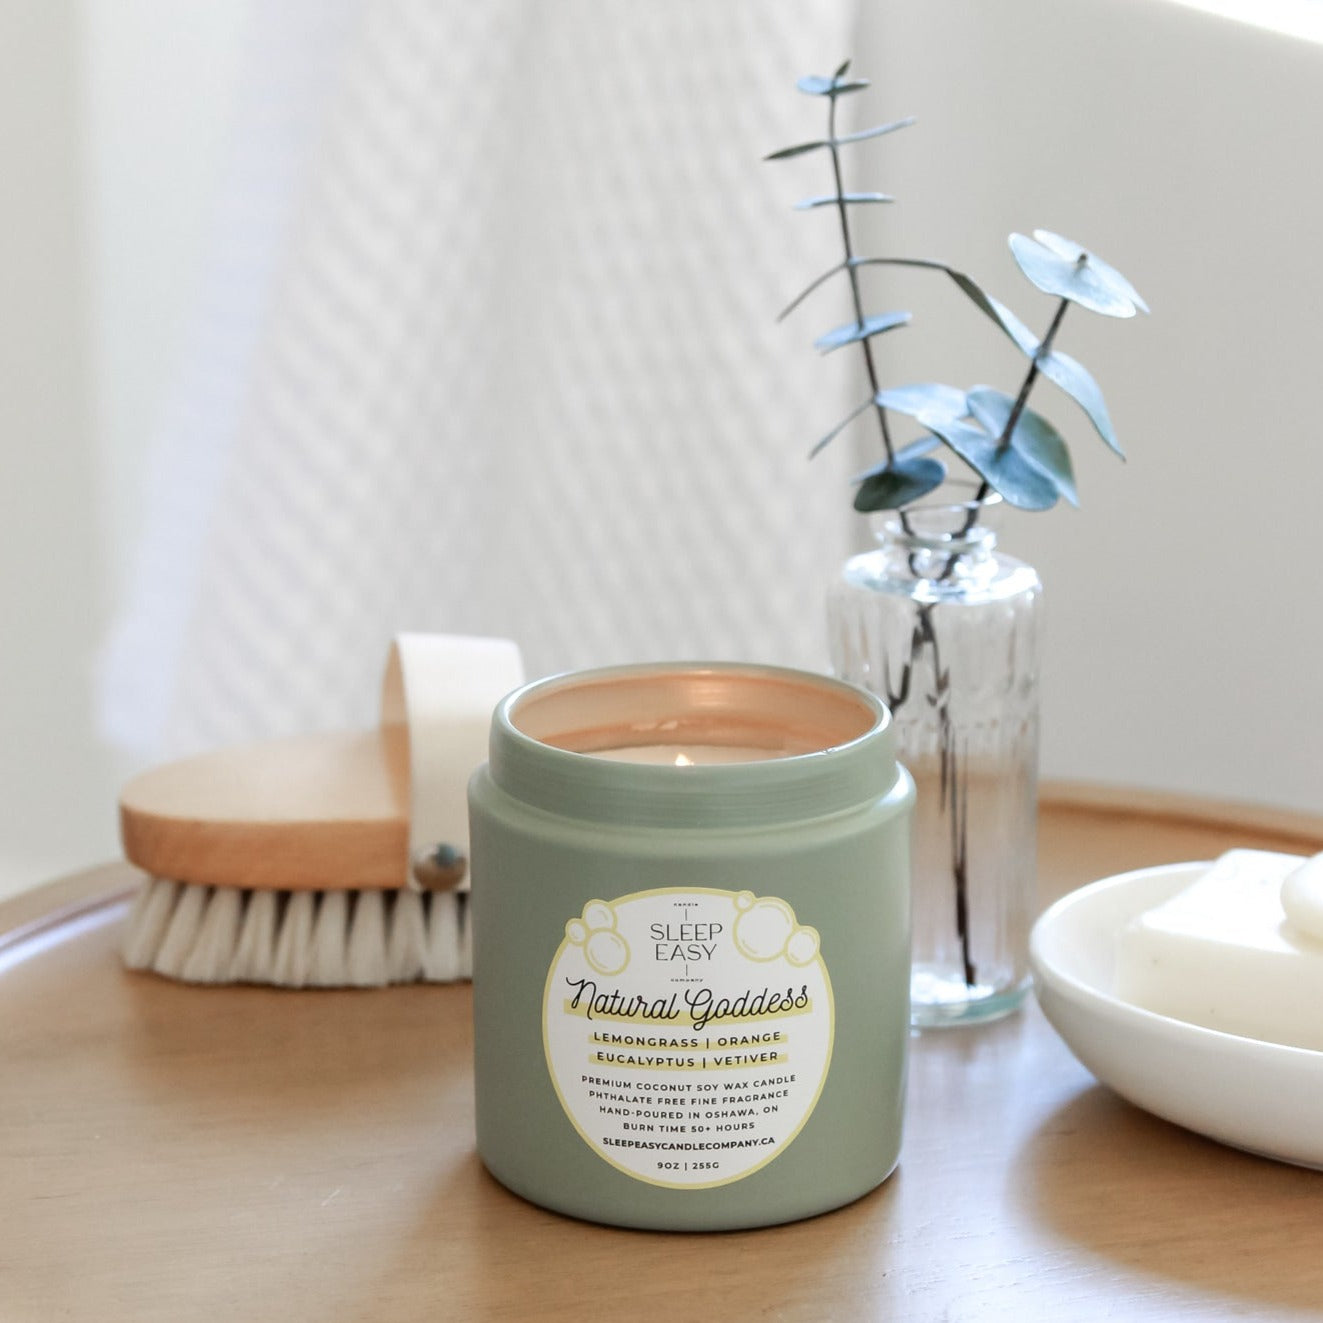 Natural Goddess Coconut Soy Candle is made with Lemongrass, Eucalyptus, and Orange Fragrance. The candle is in a green tin jar, displayed on a wooden table. A soap dish with natural soap is in the background as well as a vase with two eucalyptus stems. 